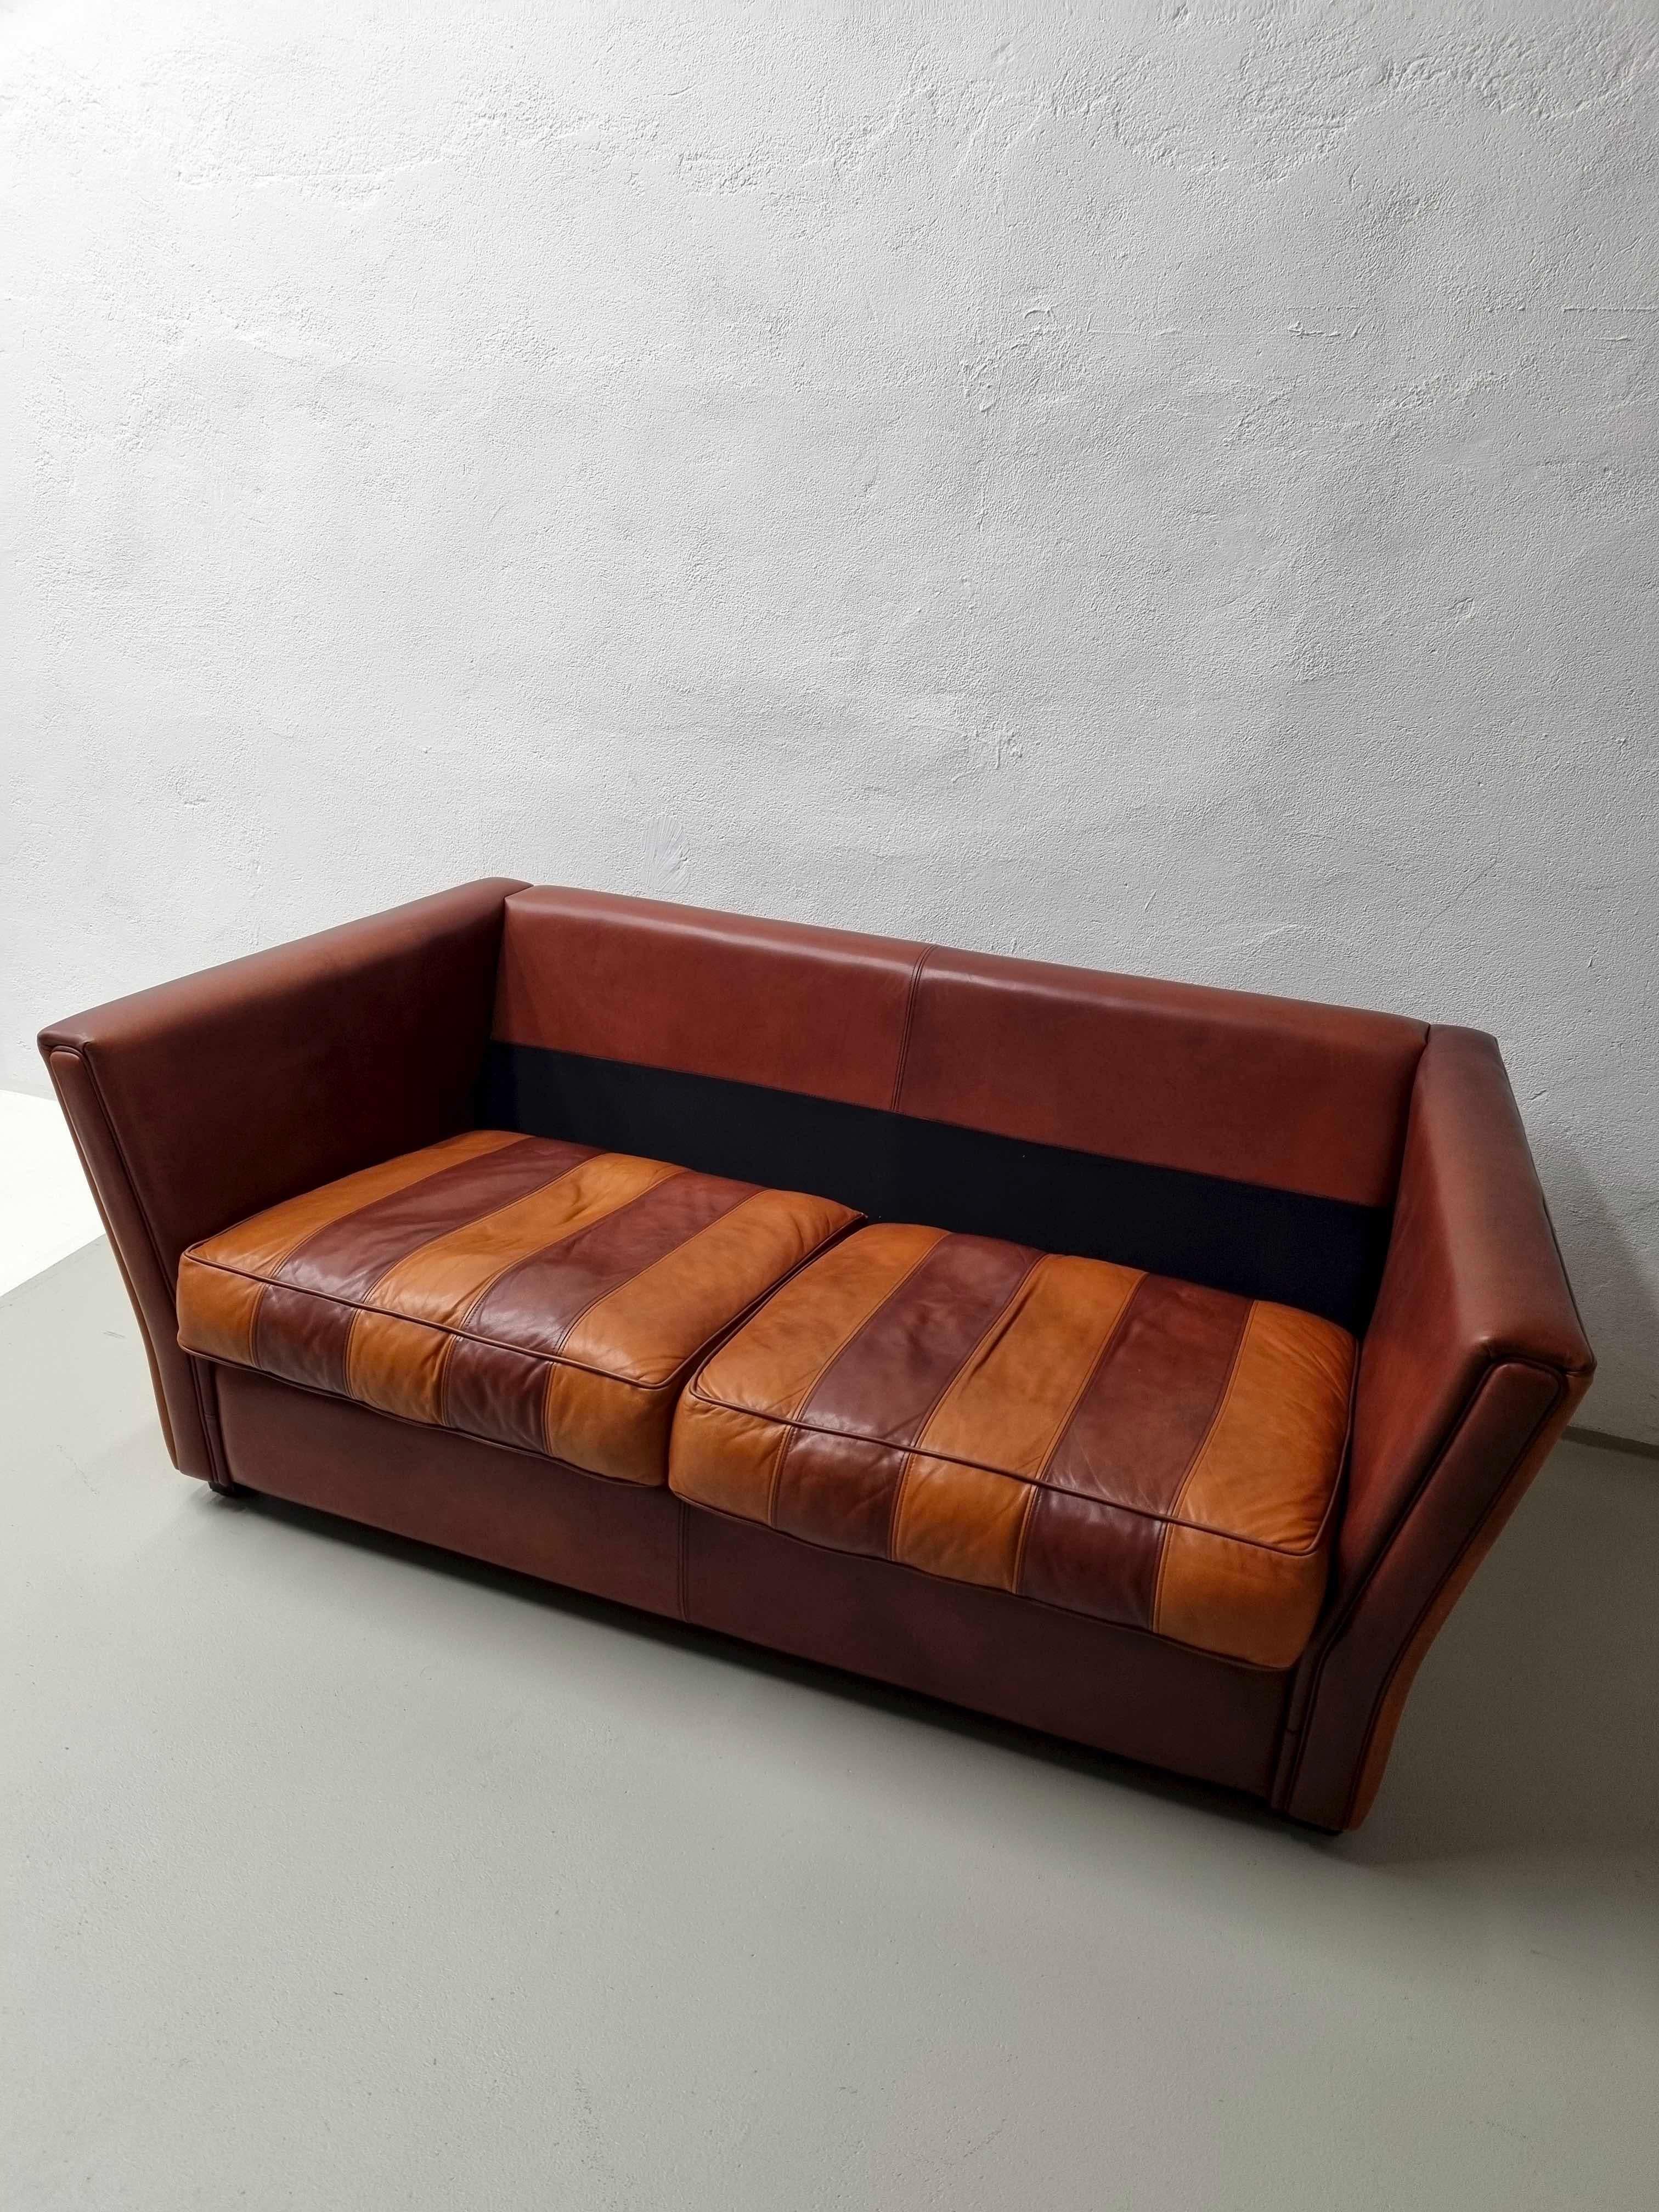 Vintage Striped Brown Orange Leather Sofa, 1990s In Good Condition For Sale In Rīga, LV